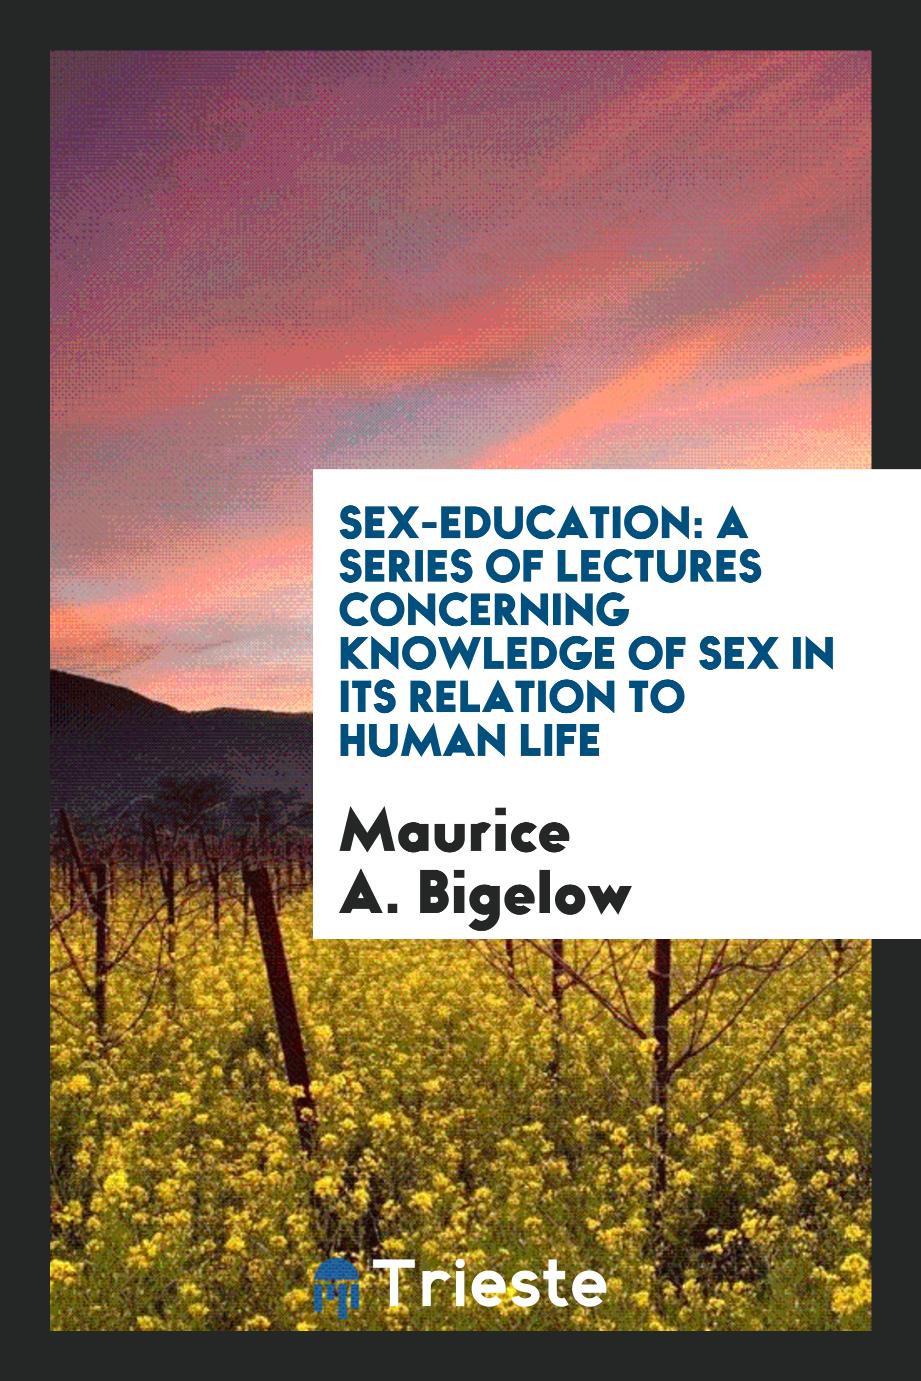 Sex-education: a series of lectures concerning knowledge of sex in its relation to human life